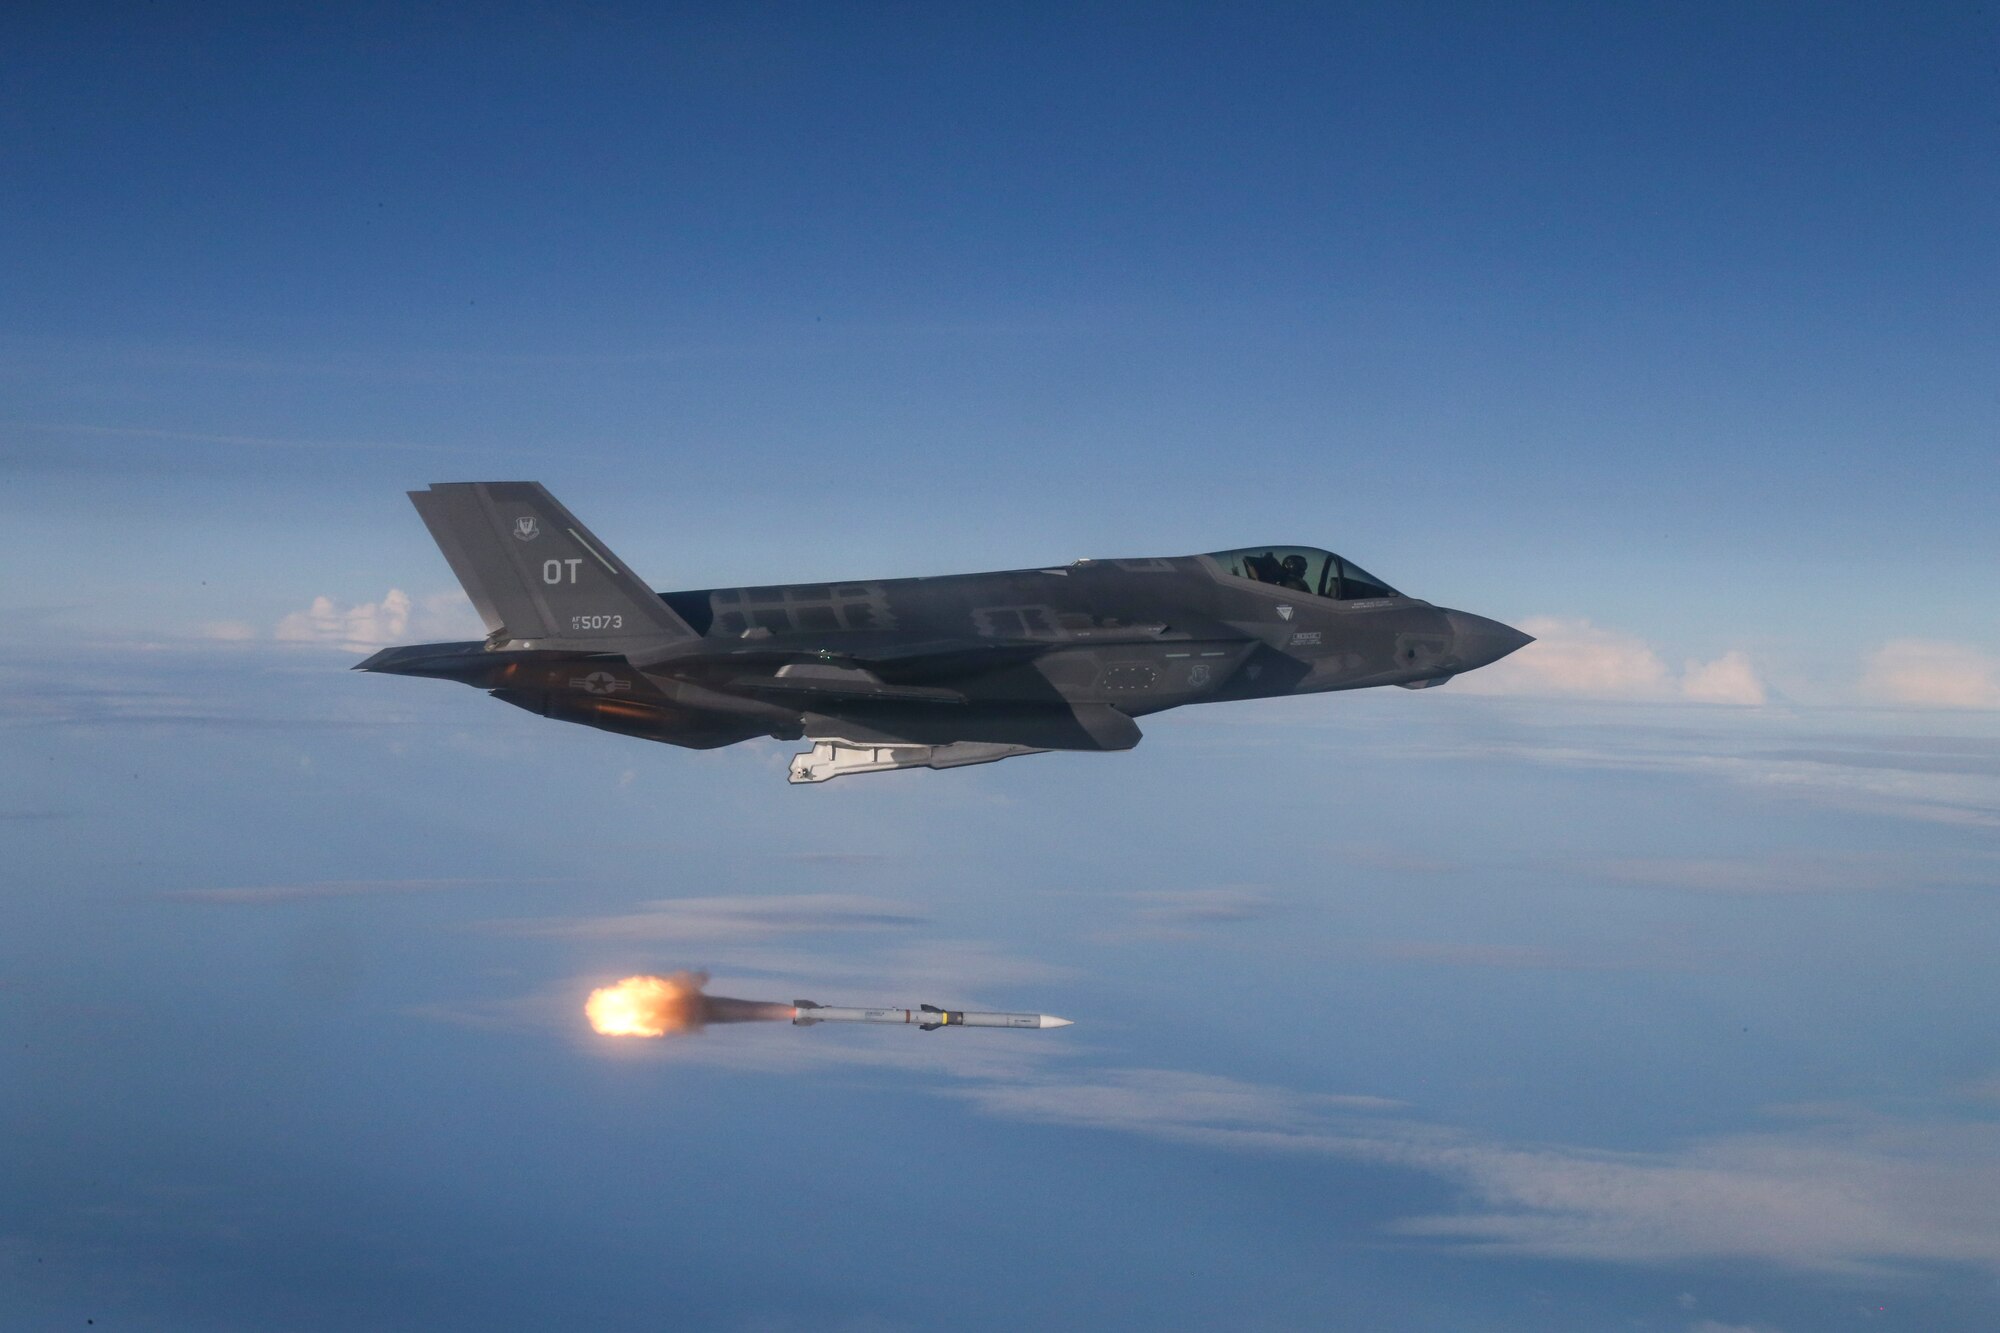 F-35A Lightning II test aircraft assigned to the 31st Test Evaluation Squadron from Edwards Air Force Base, California, released AIM-120 AMRAAM and AIM-9X missiles at QF-16 targets during a live-fire test over an Air Force range in the Gulf of Mexico on June 12, 2018.  The Joint Operational Test Team conducted the missions as part of Block 3F Initial Operational Test and Evaluation.